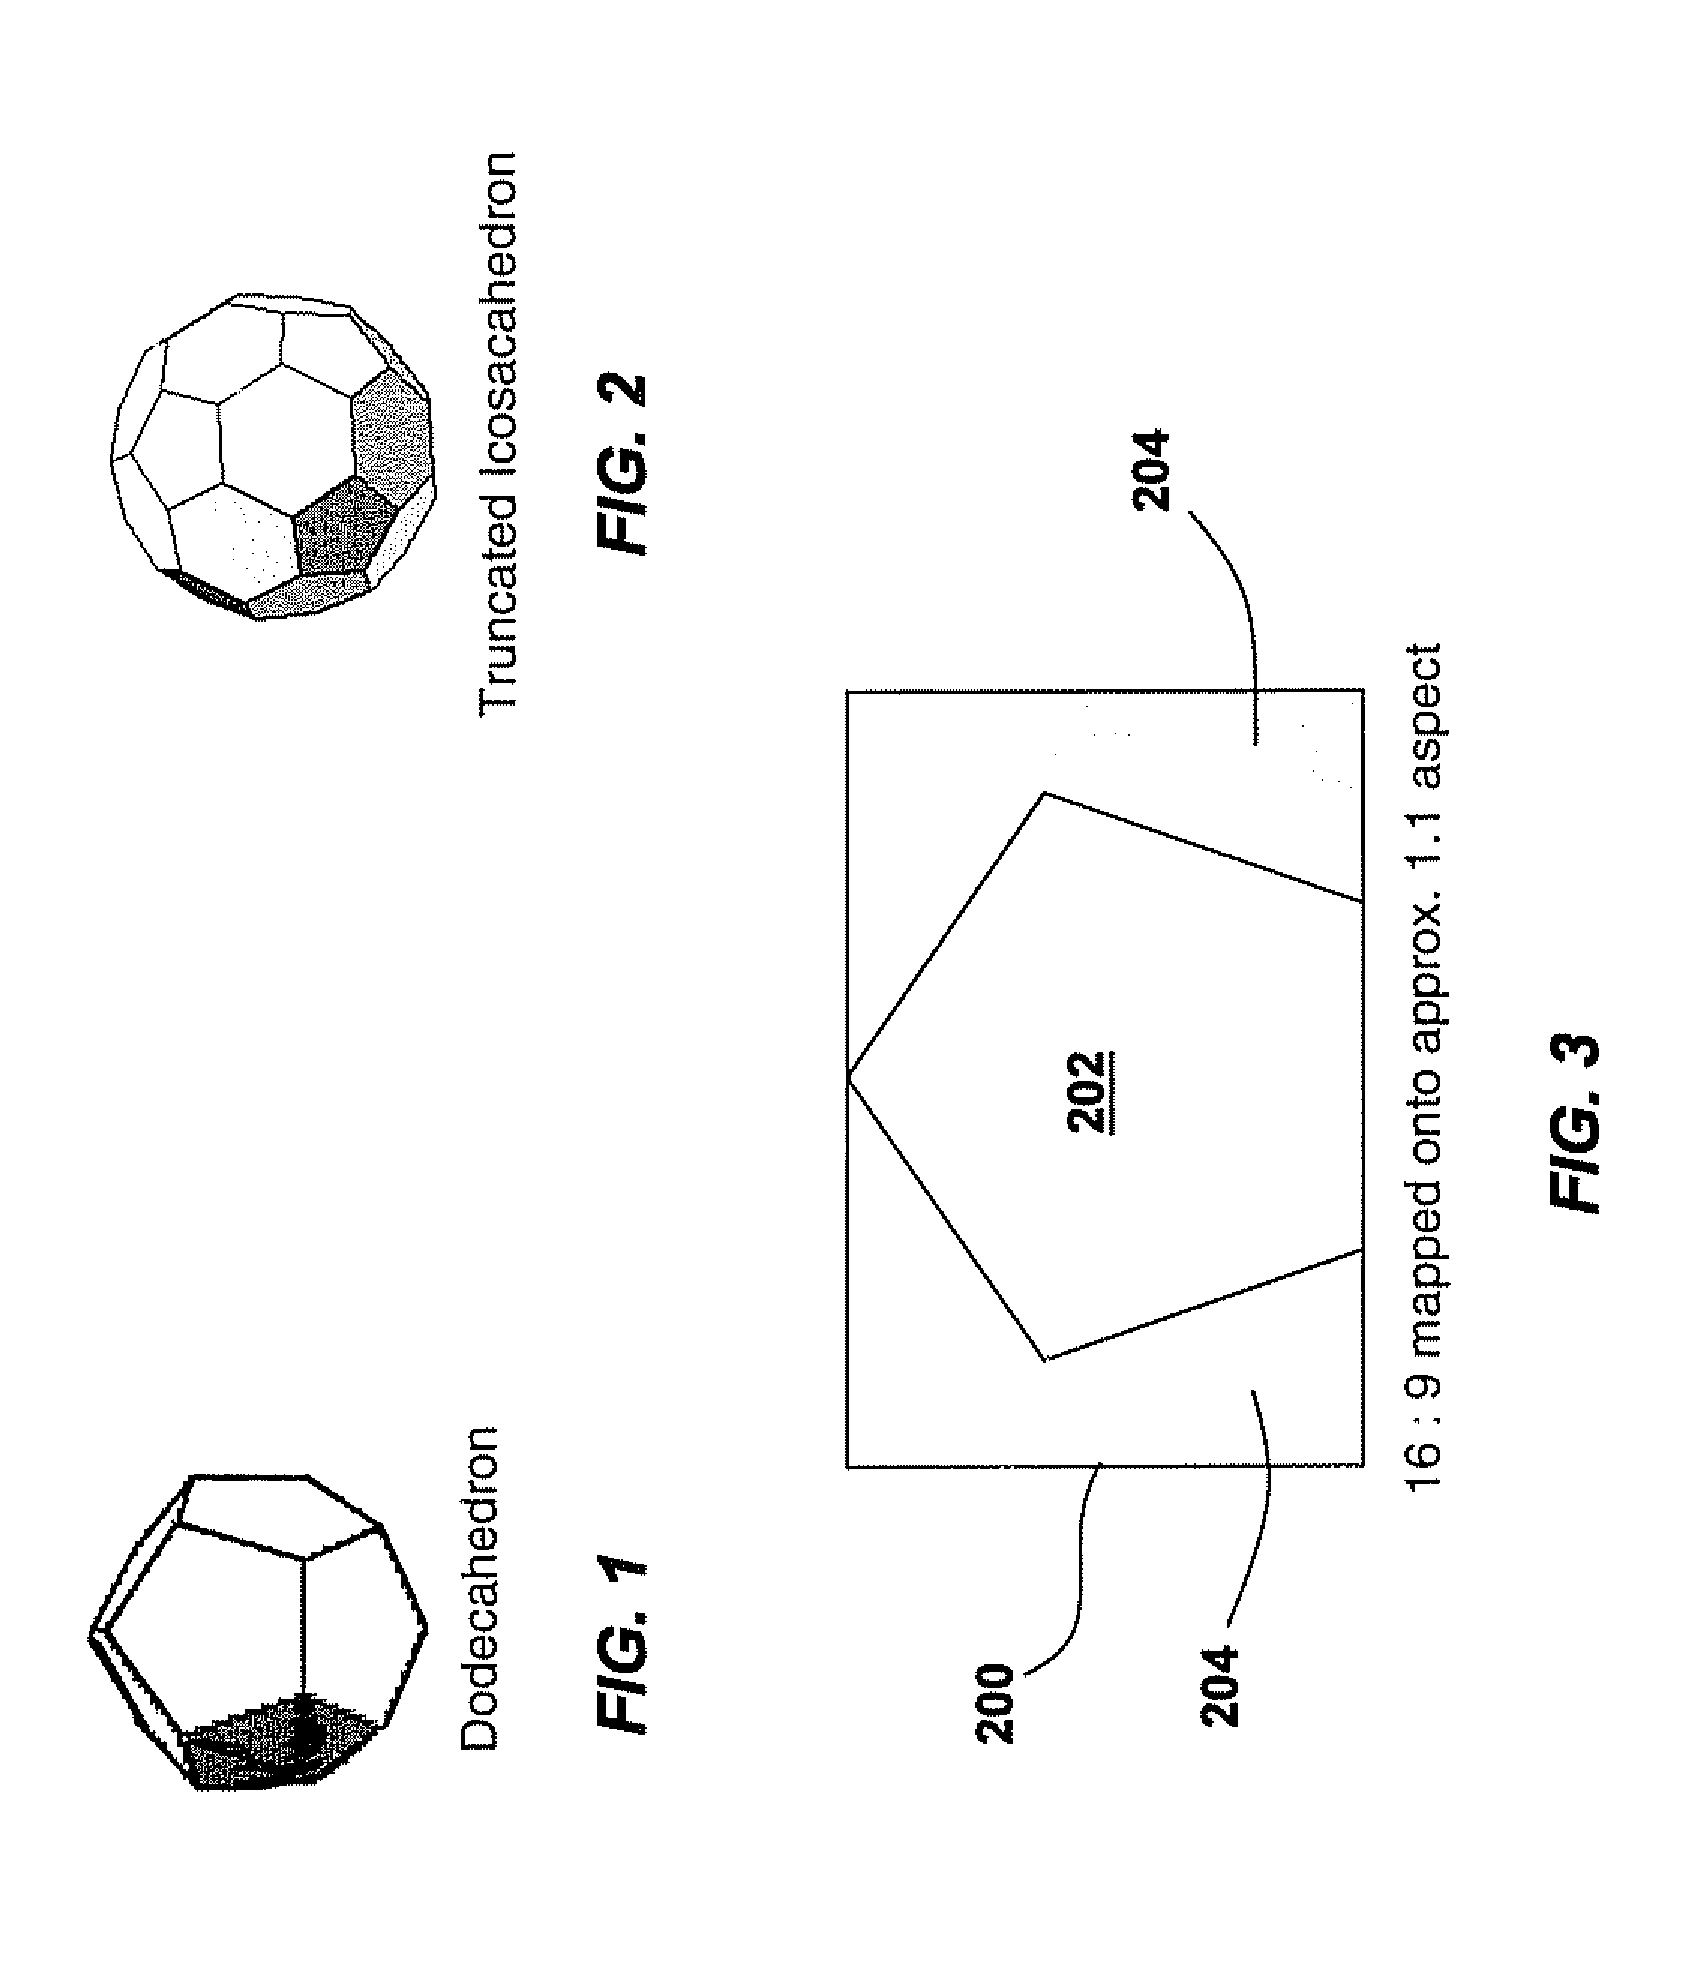 Display system for high-definition projectors